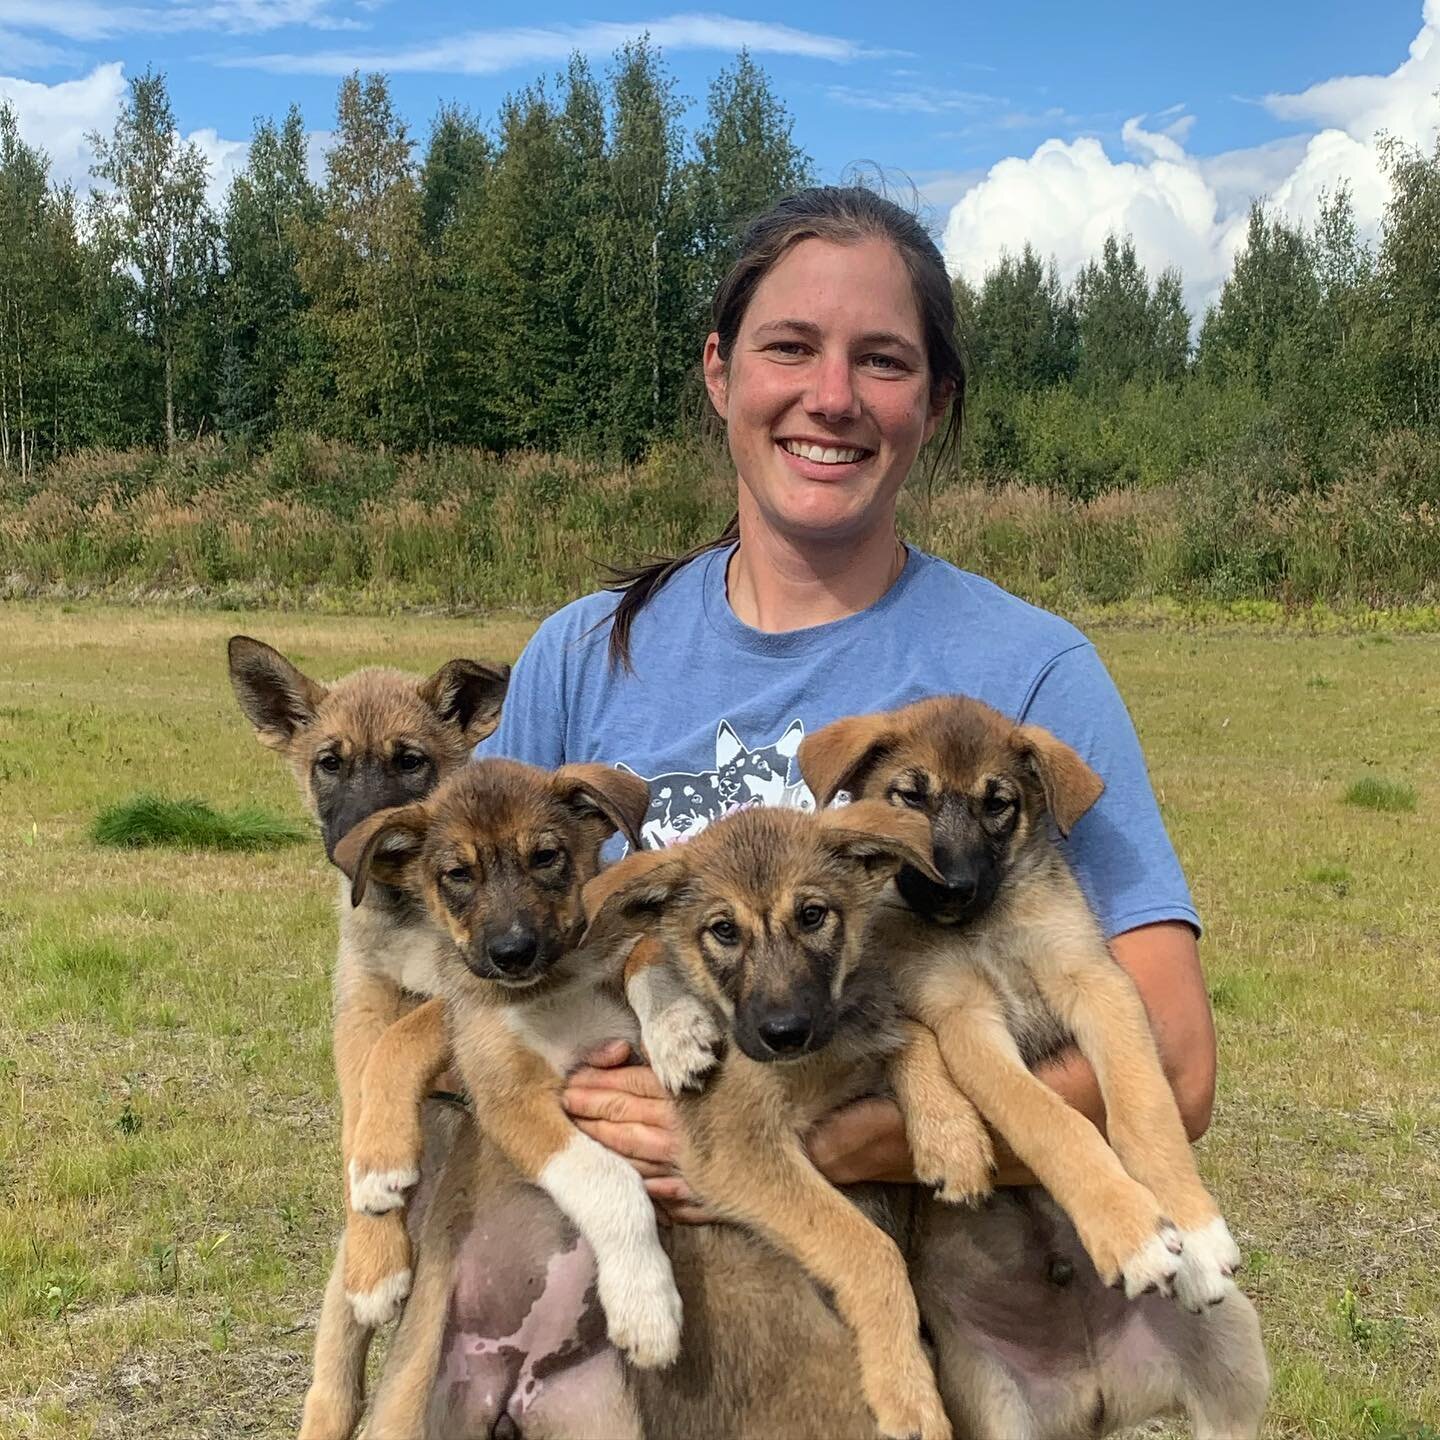 While we wish all ten Dracula pups could have joined the RK team, we had to share the love and cuteness with friends. Cheddar, Havarti, Mozzie, and Muenster are part of the 2020 RK puppy class!